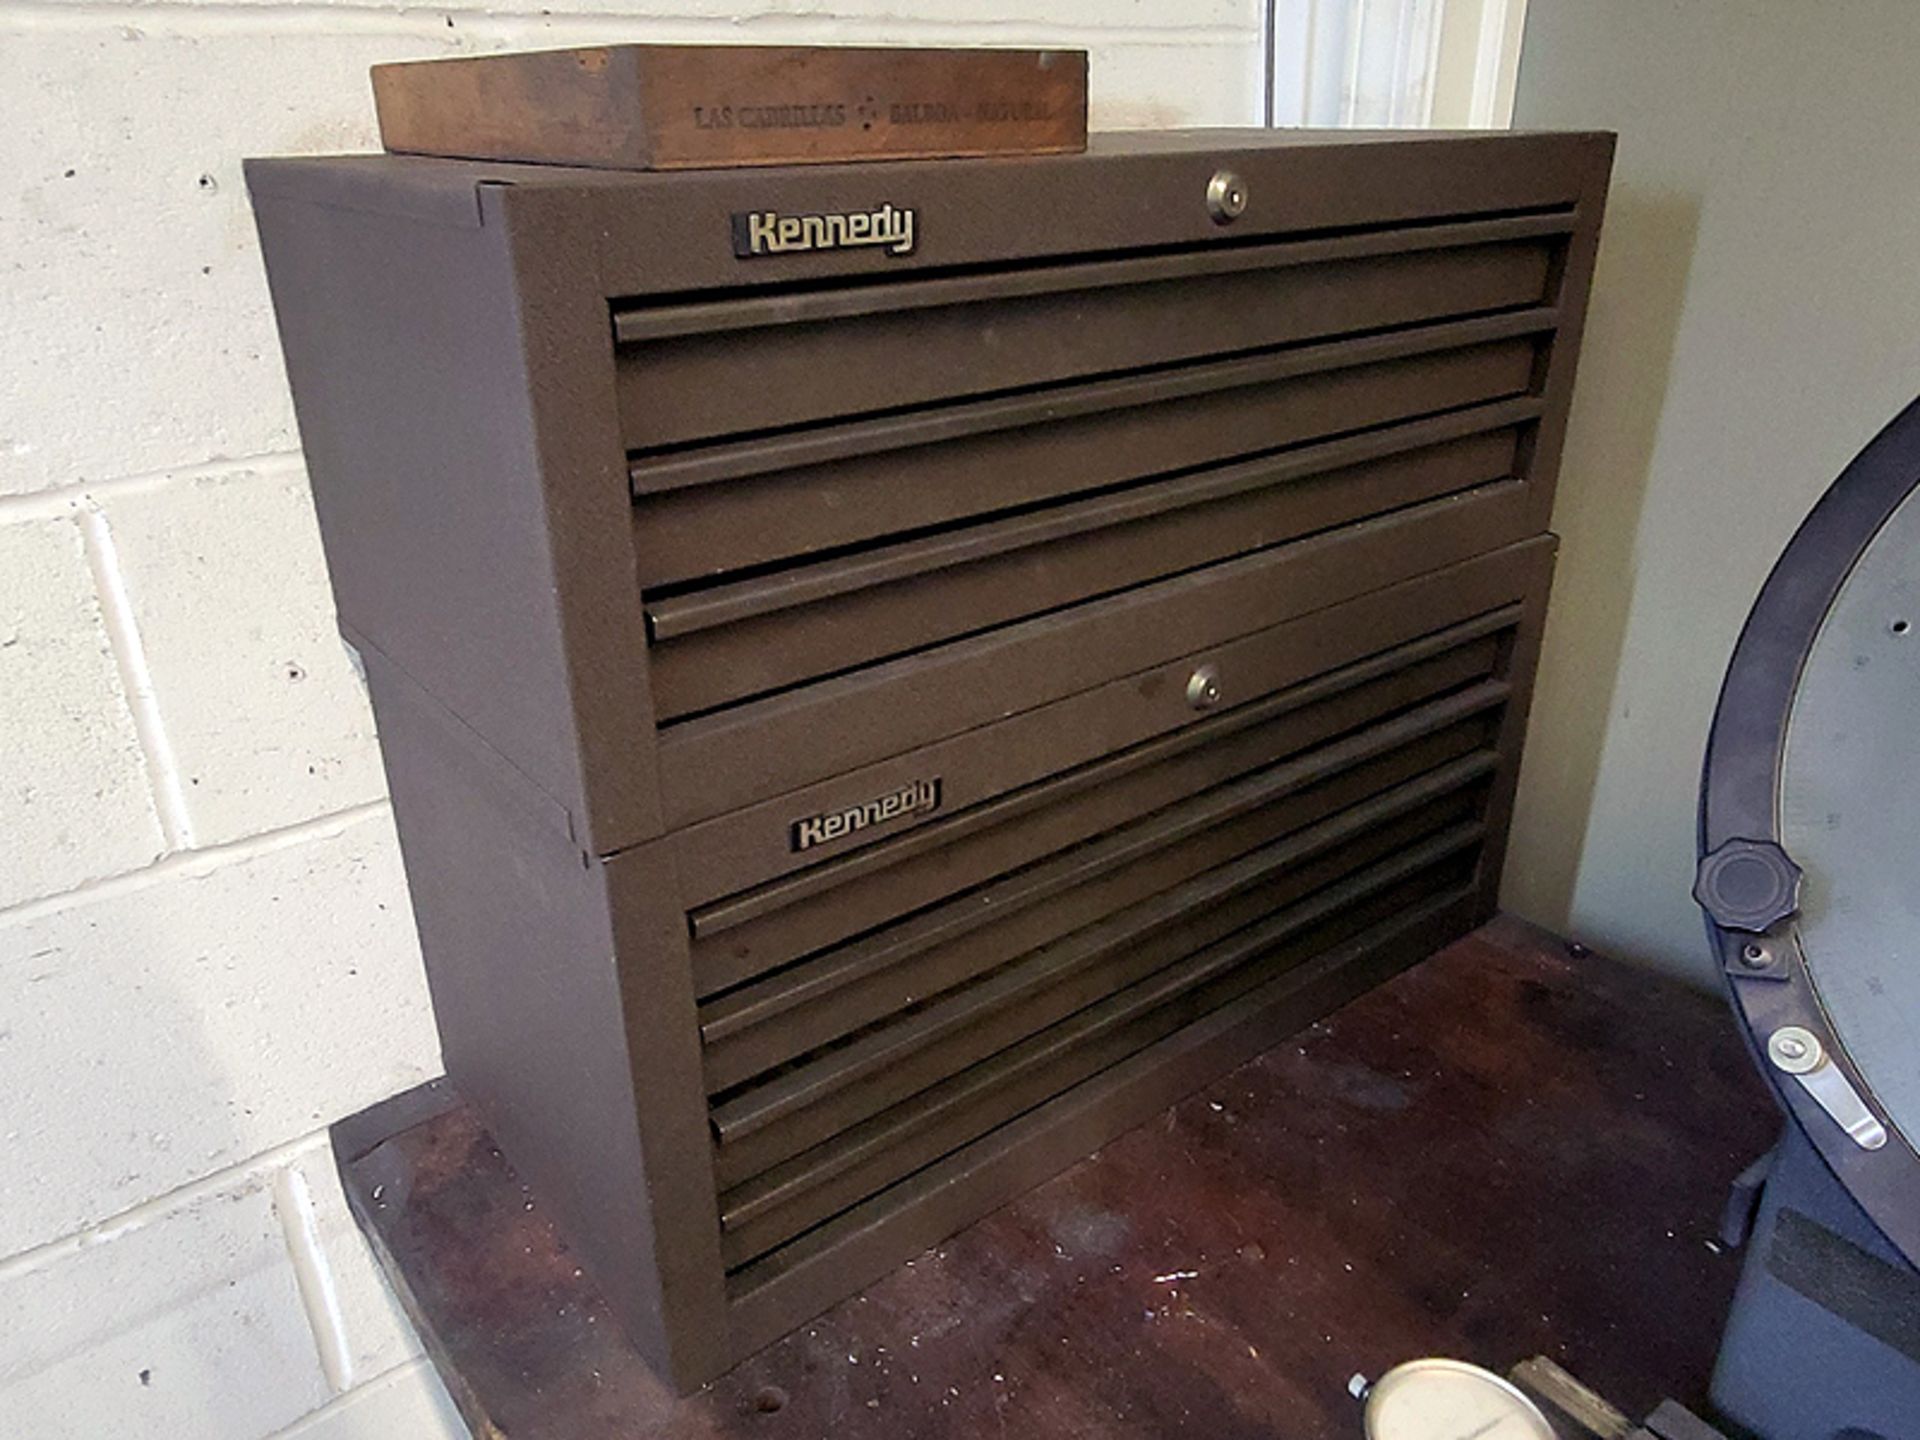 Kennedy 3 Drawer & Kennedy 4 Drawer Bit Chests Stacked w/ Contents